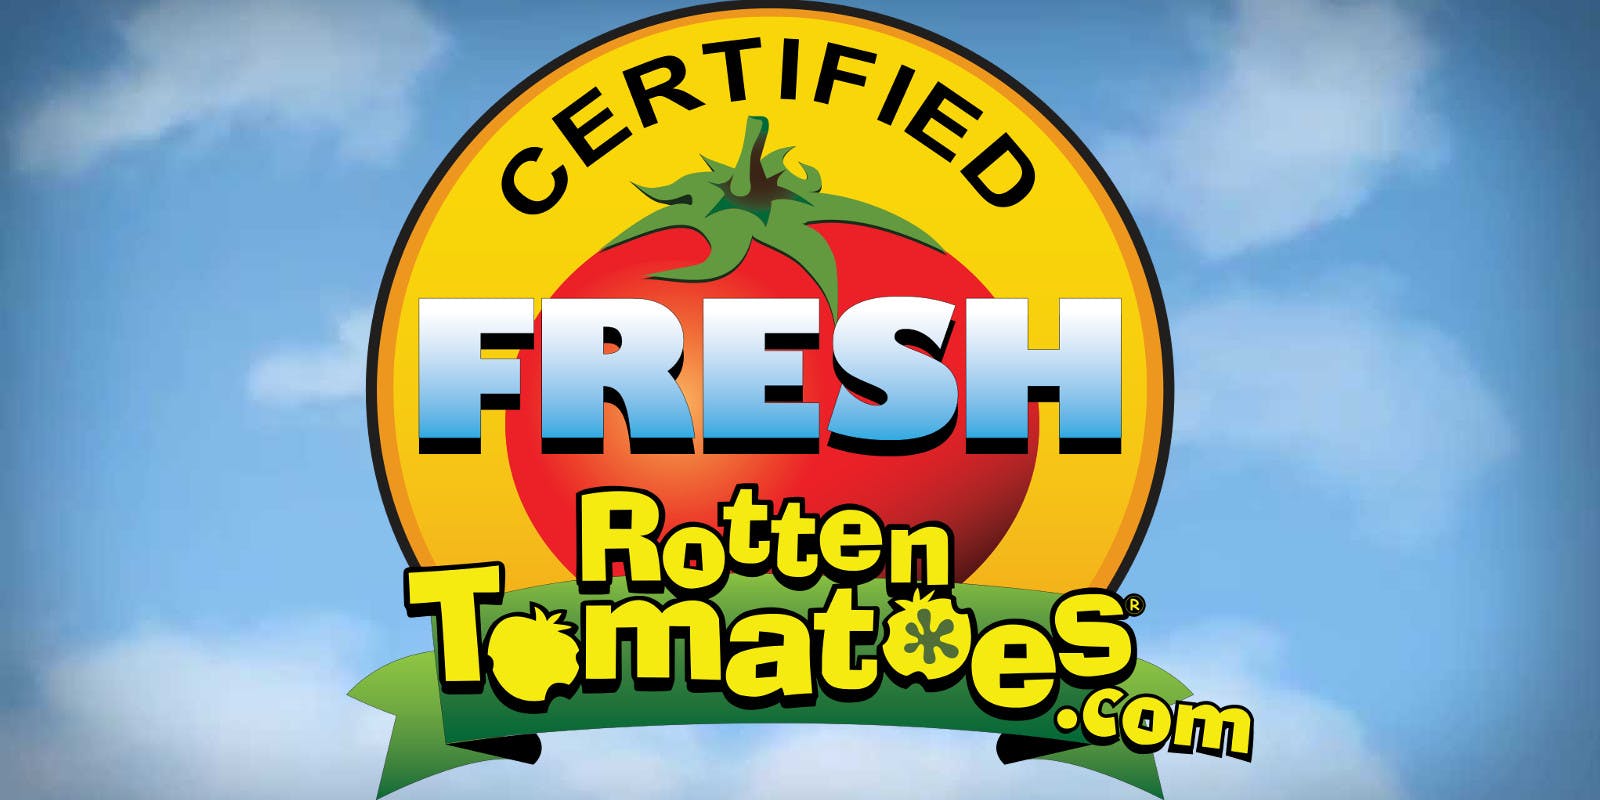 Rotten tomatoes vs hollywood